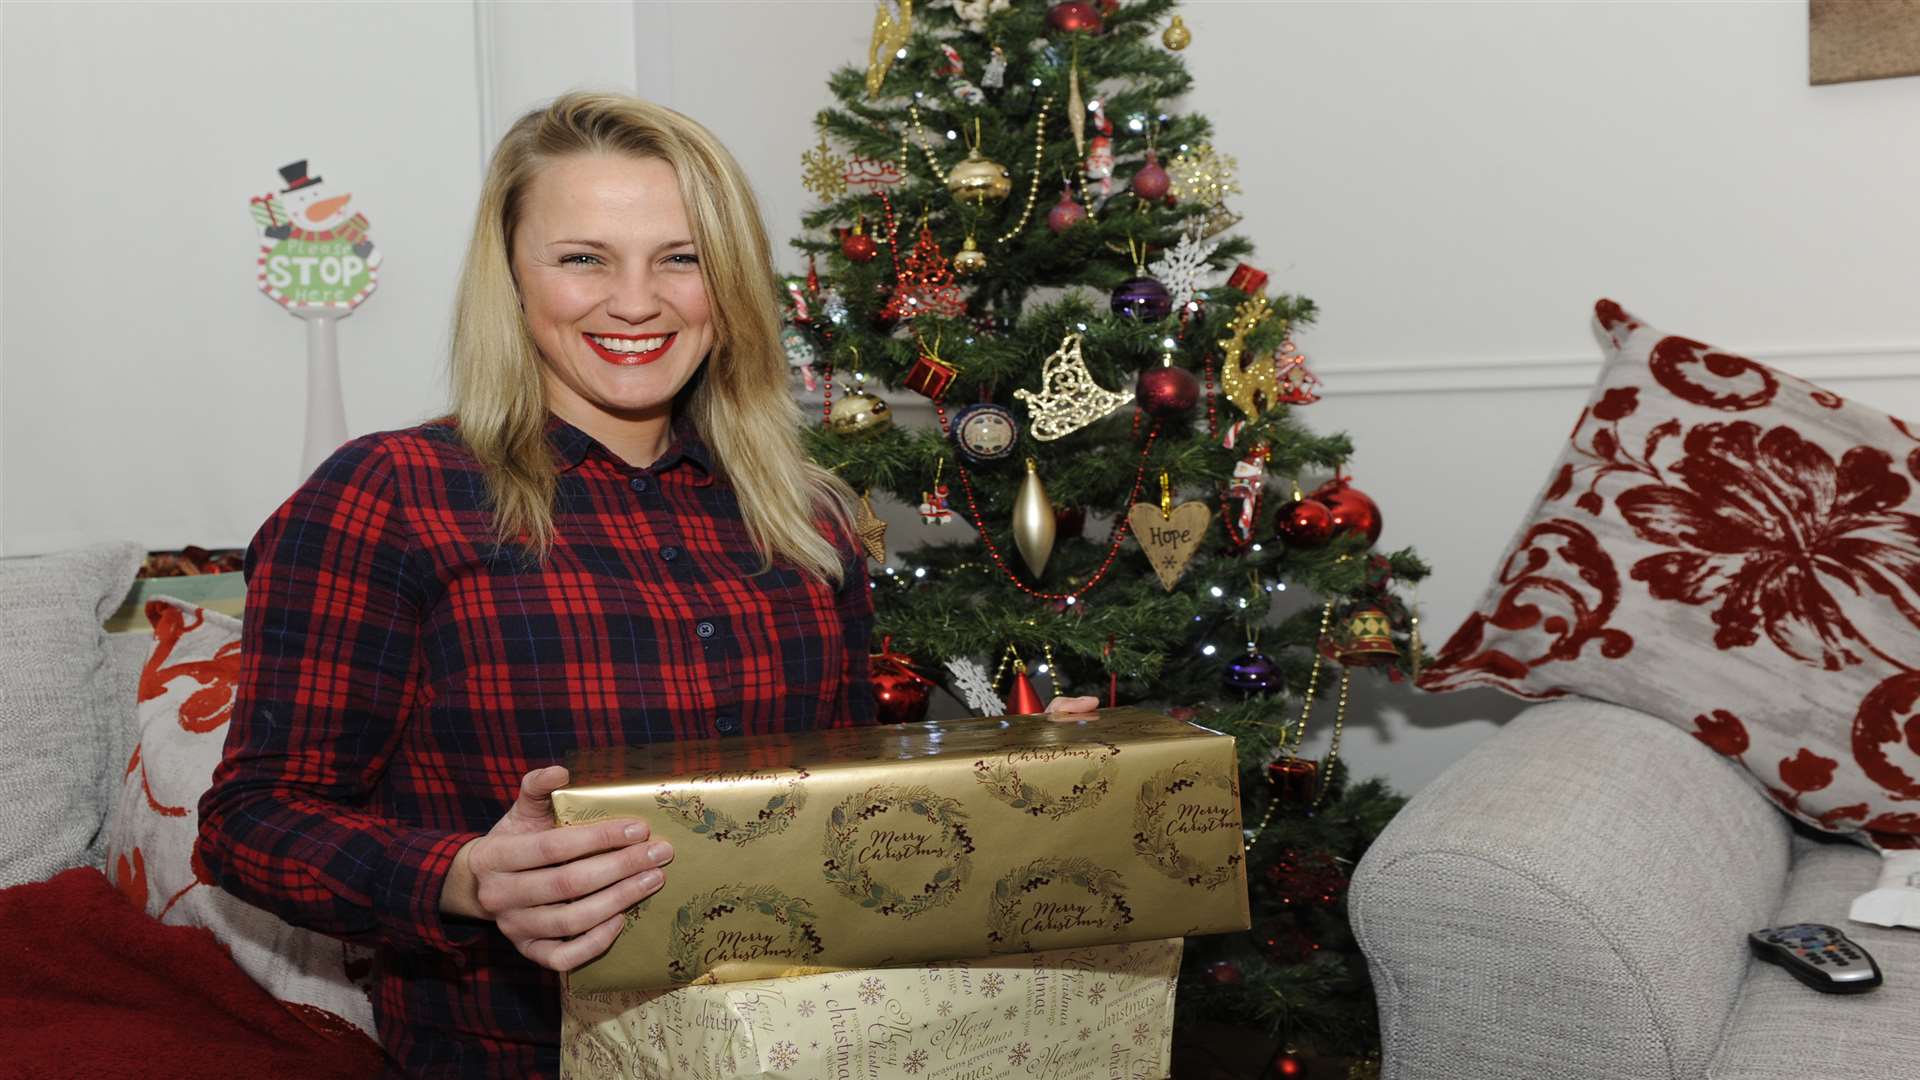 Jaymie Dunster is leading a shoe box campaign